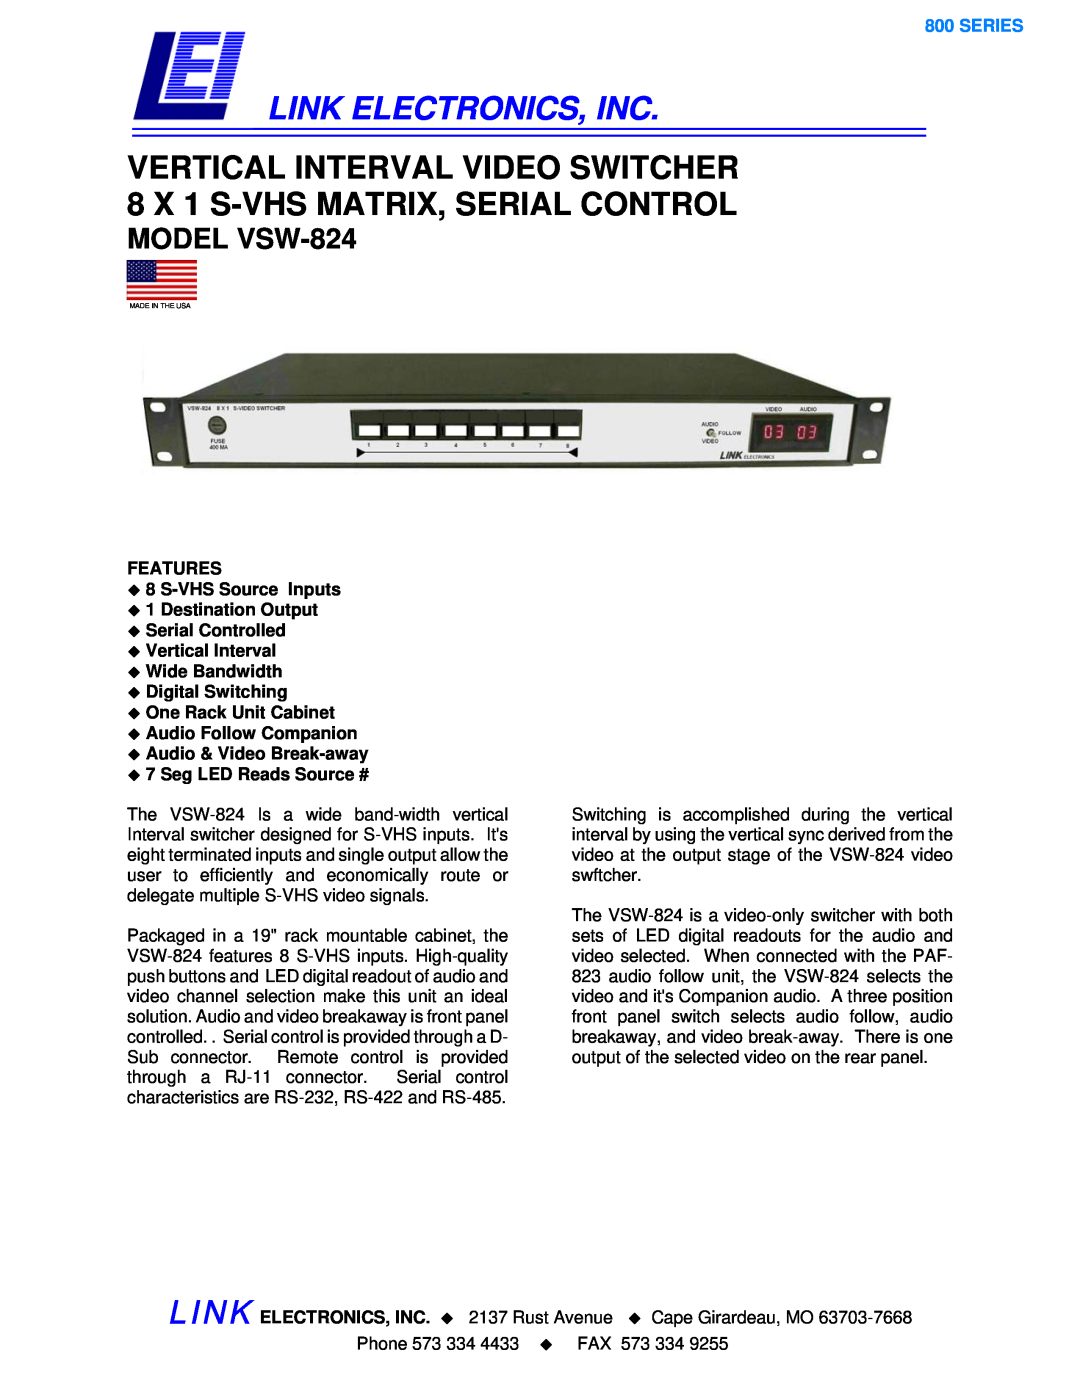 Link electronic VSW-824 manual Link Electronics, Inc, VERTICAL INTERVAL VIDEO SWITCHER 8 X 1 S-VHS MATRIX, SERIAL CONTROL 